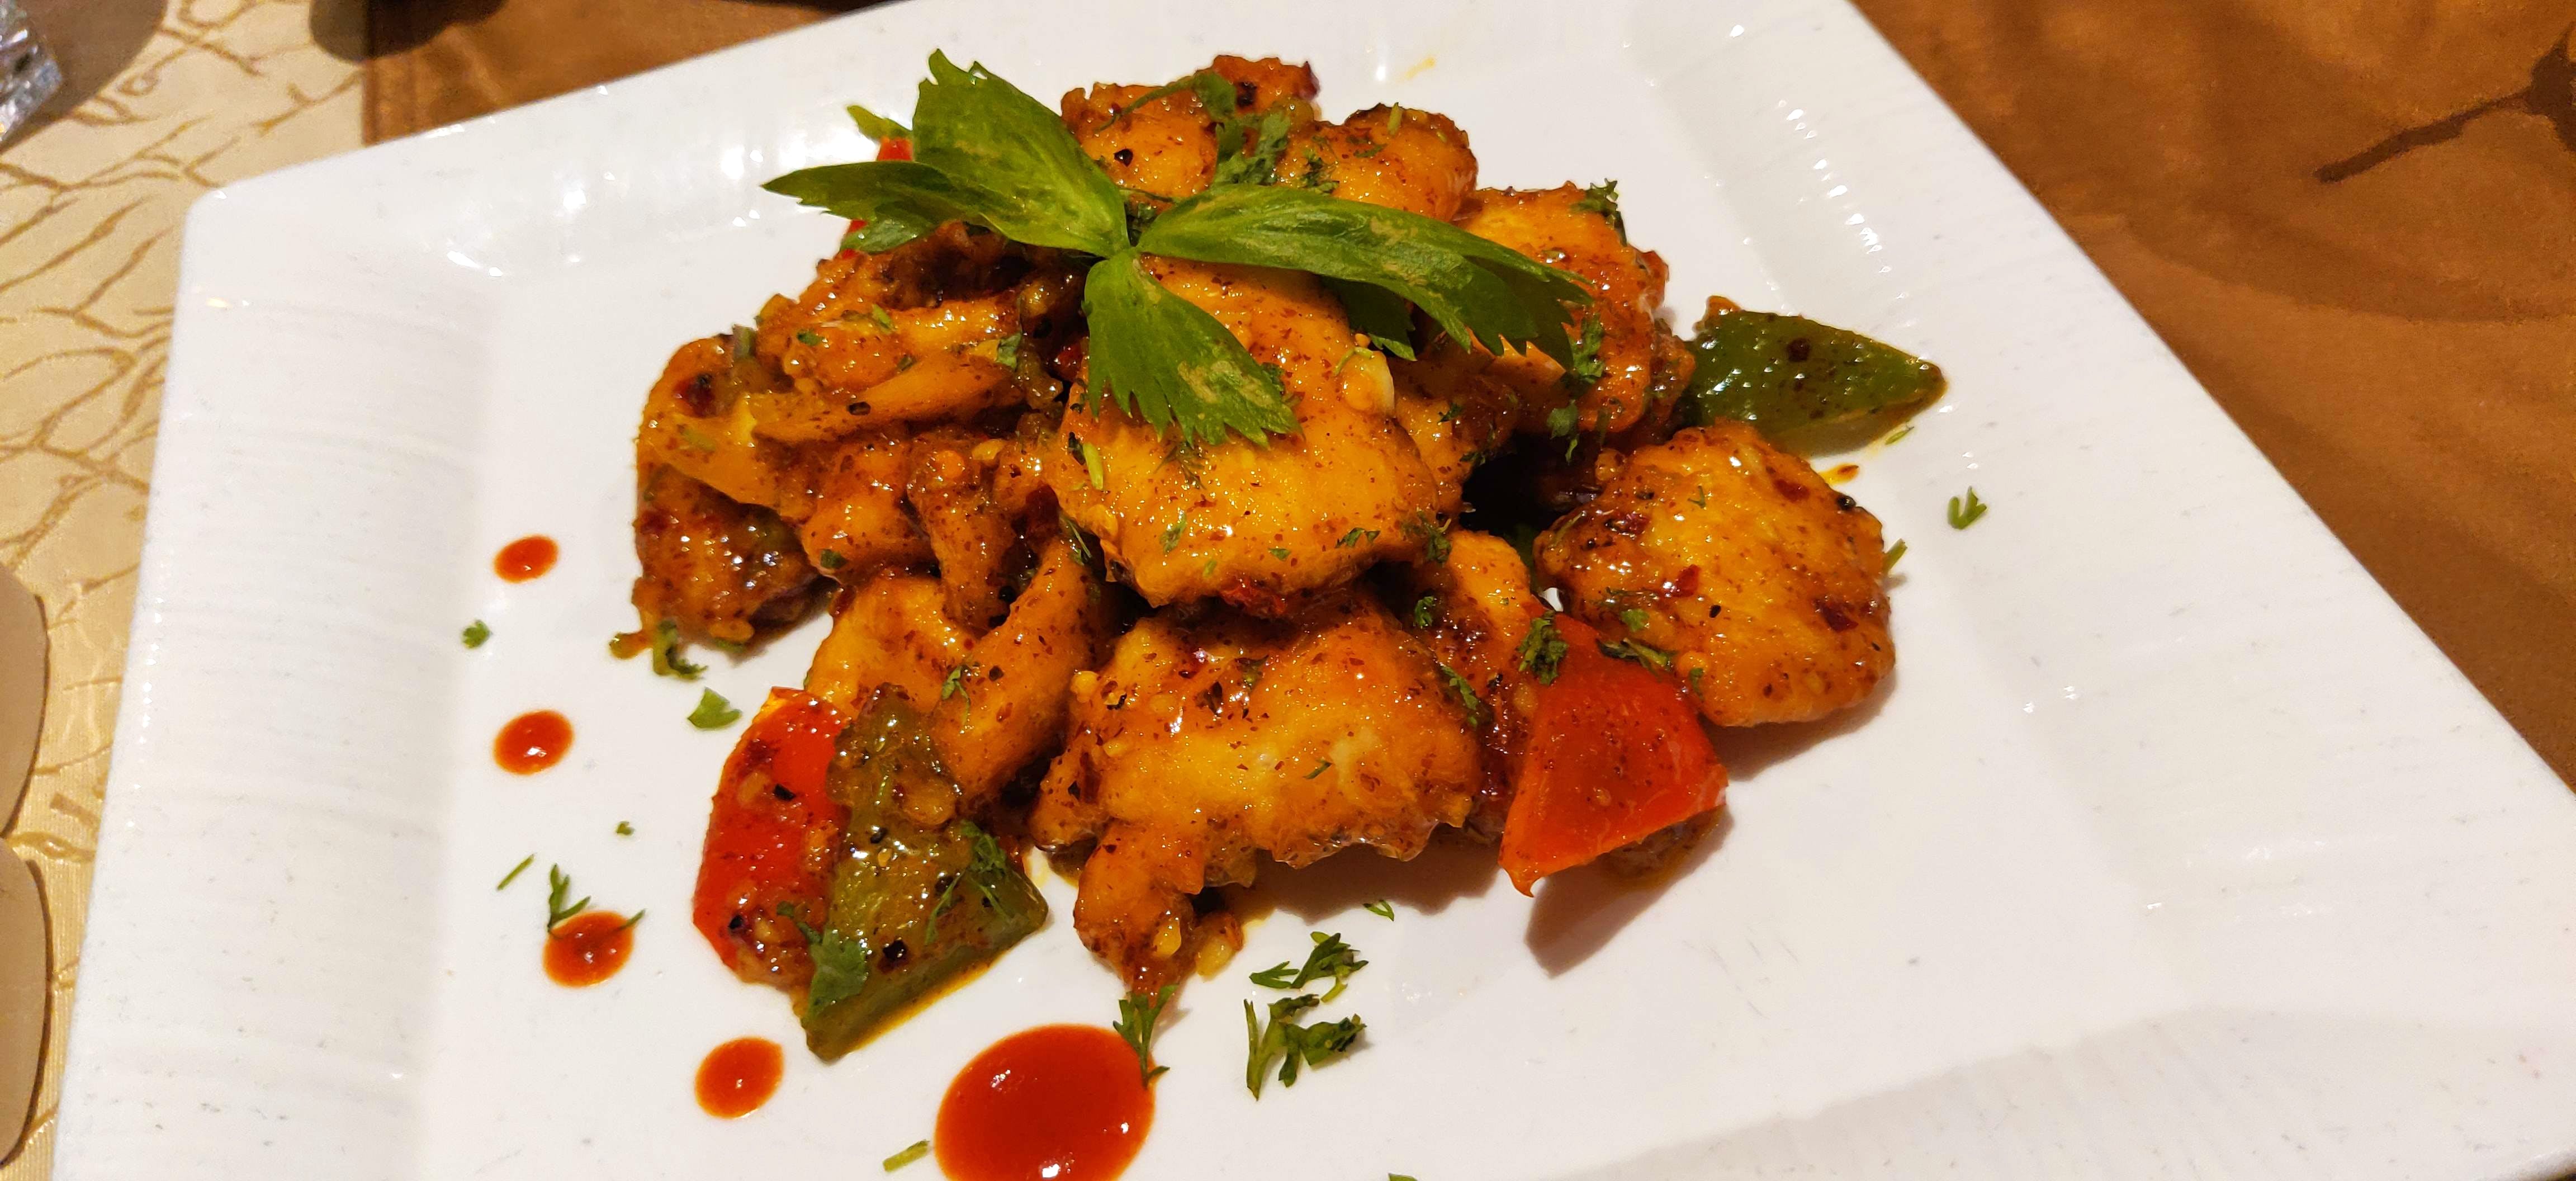 Dish,Cuisine,Food,Ingredient,Produce,Staple food,Meat,Recipe,Sweet and sour chicken,Vegetarian food